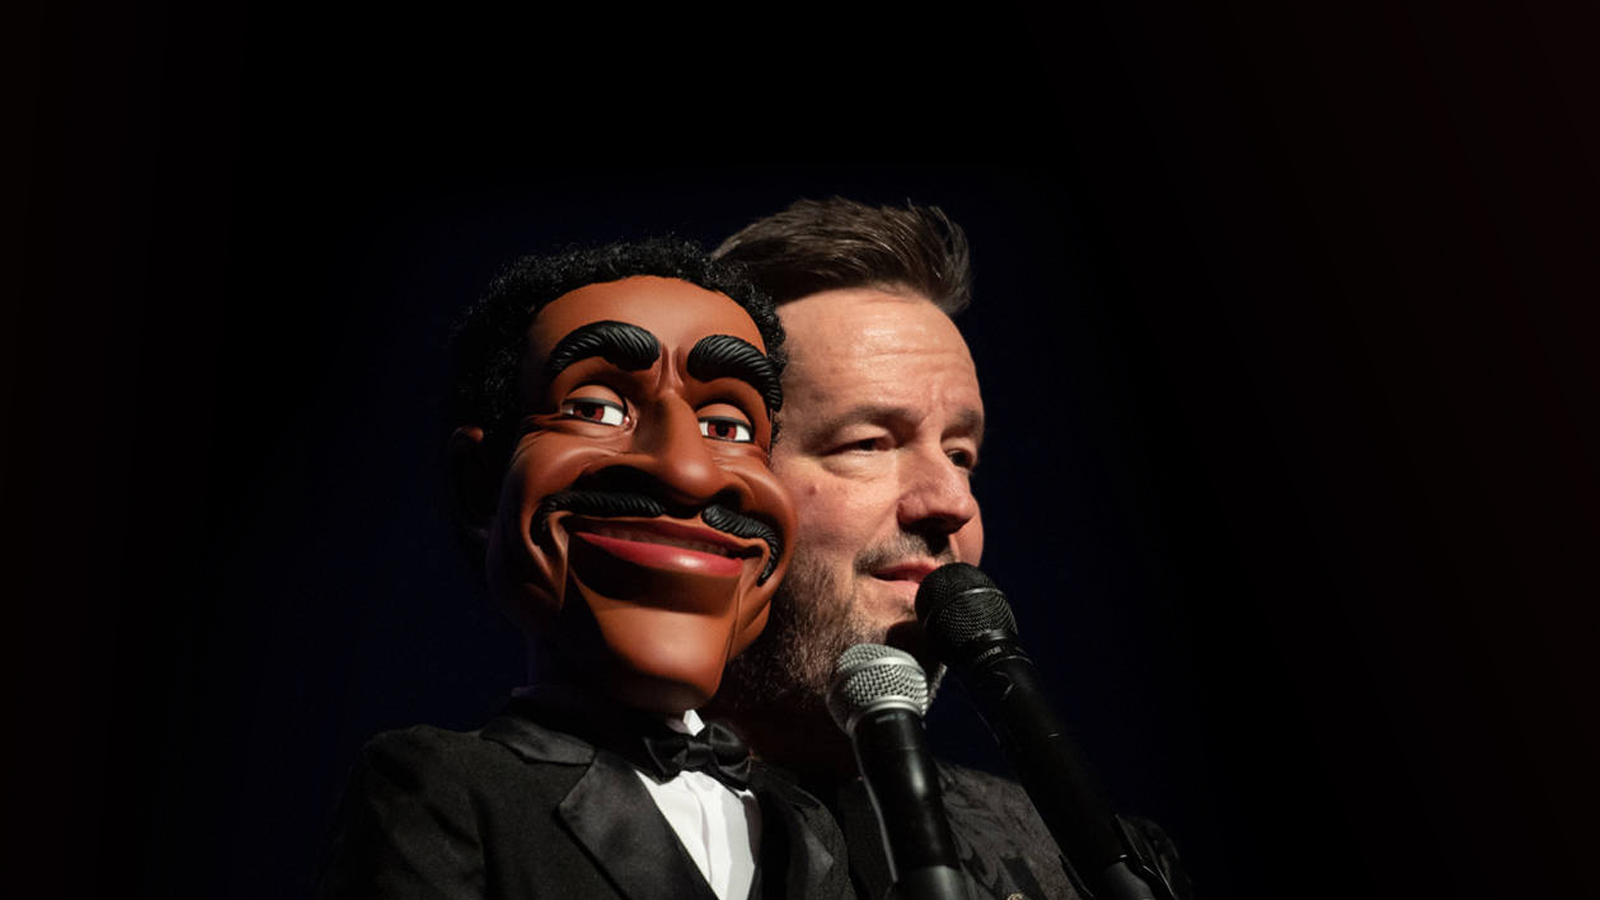 Terry Fator Tickets